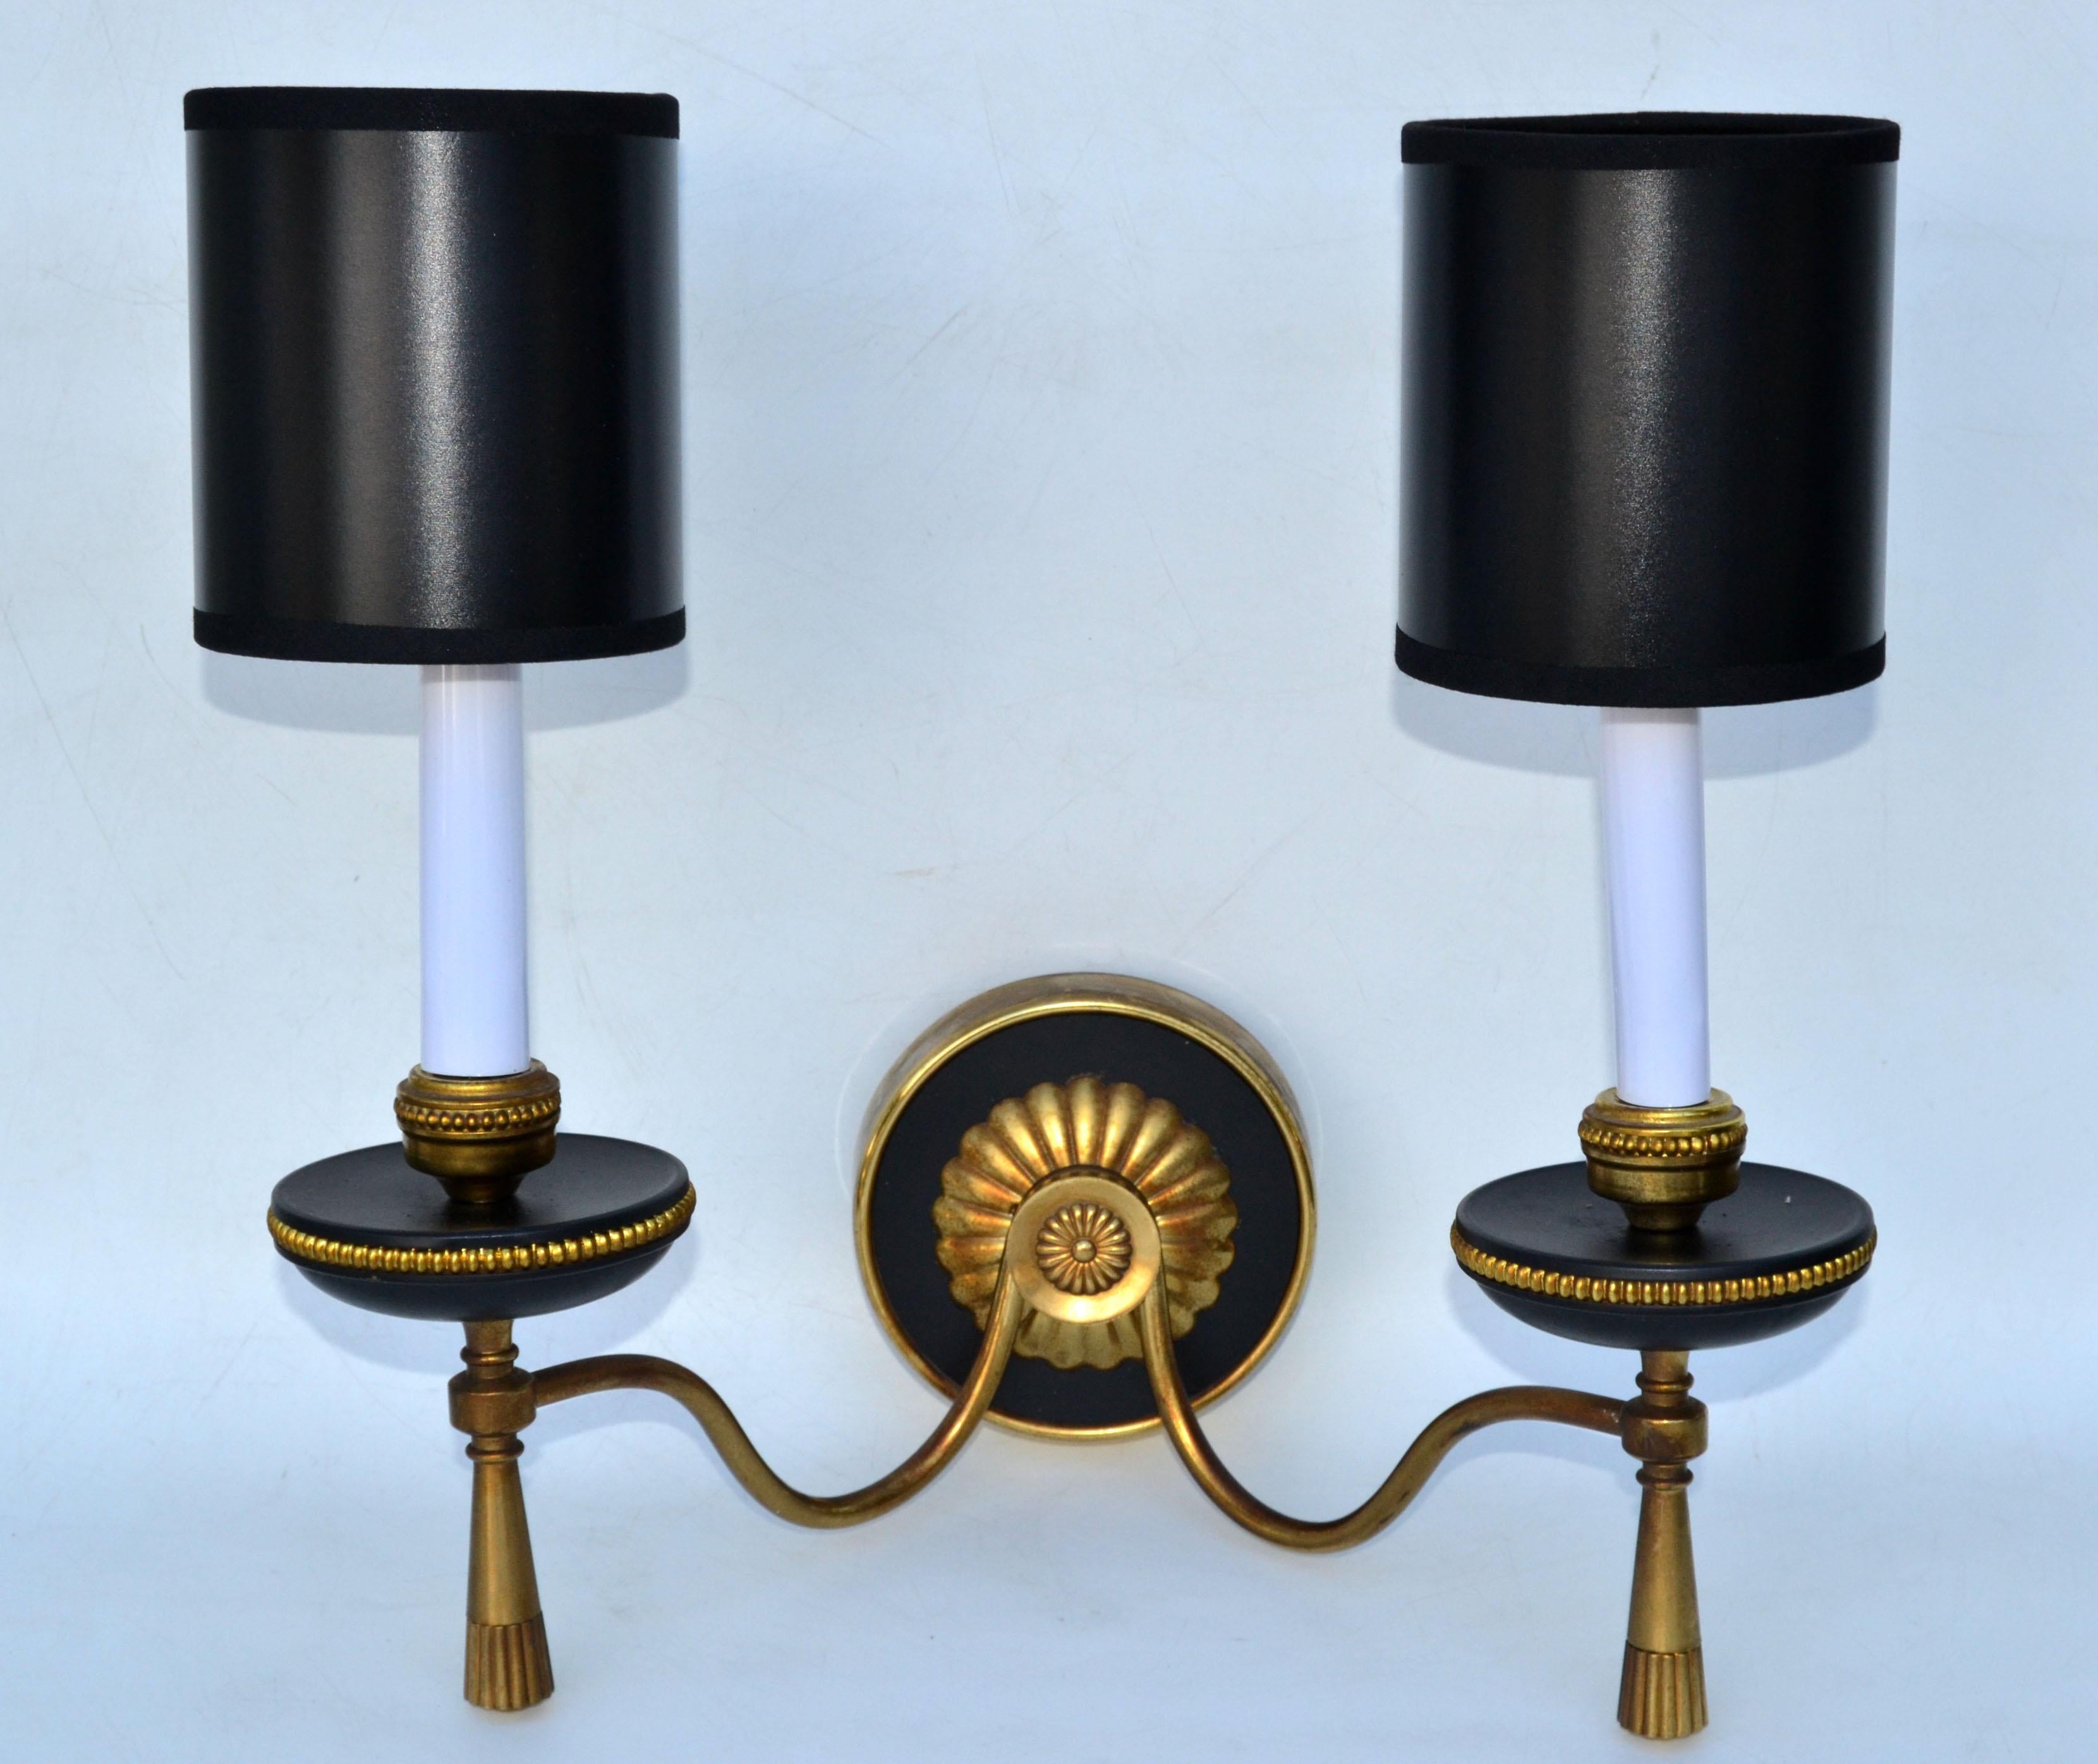 Marked Gaetano Sciolari Two Lights Wall Sconces 2 Tone Brass Italy 1970s, Pair In Good Condition For Sale In Miami, FL